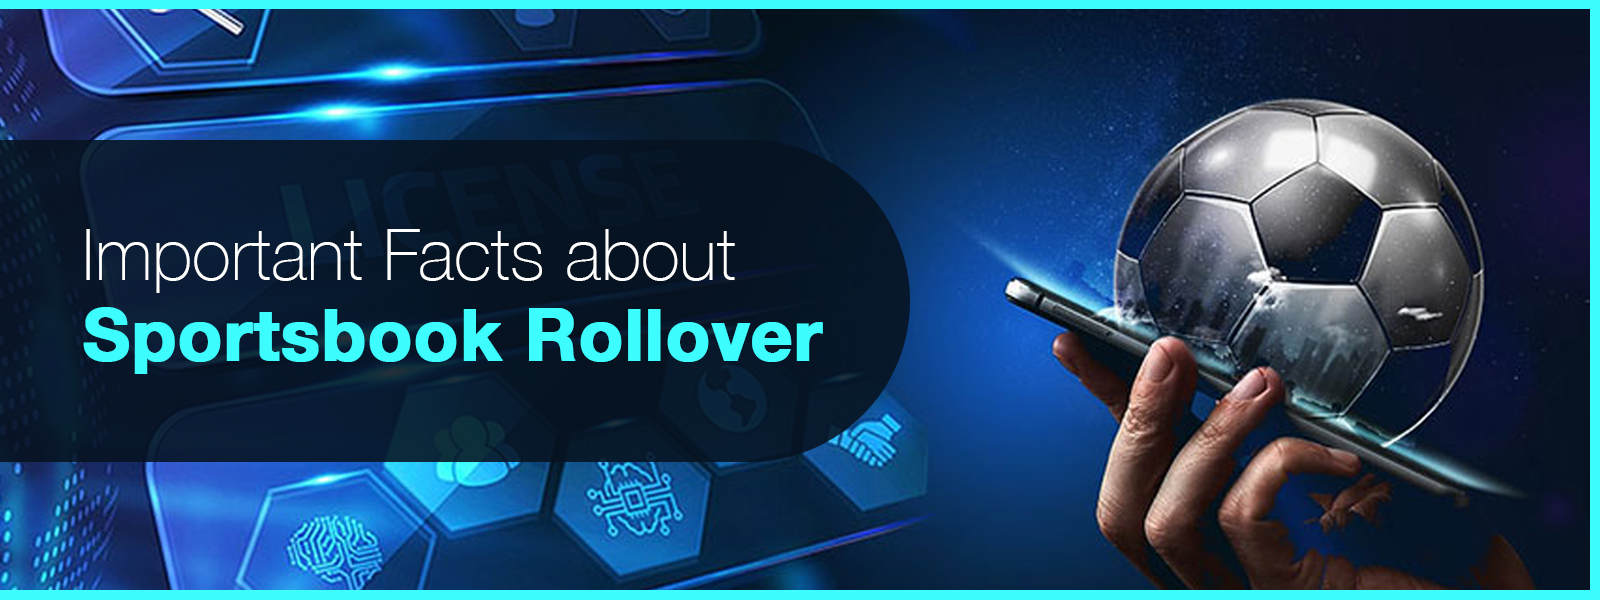 Important Facts About Sportsbook Rollover